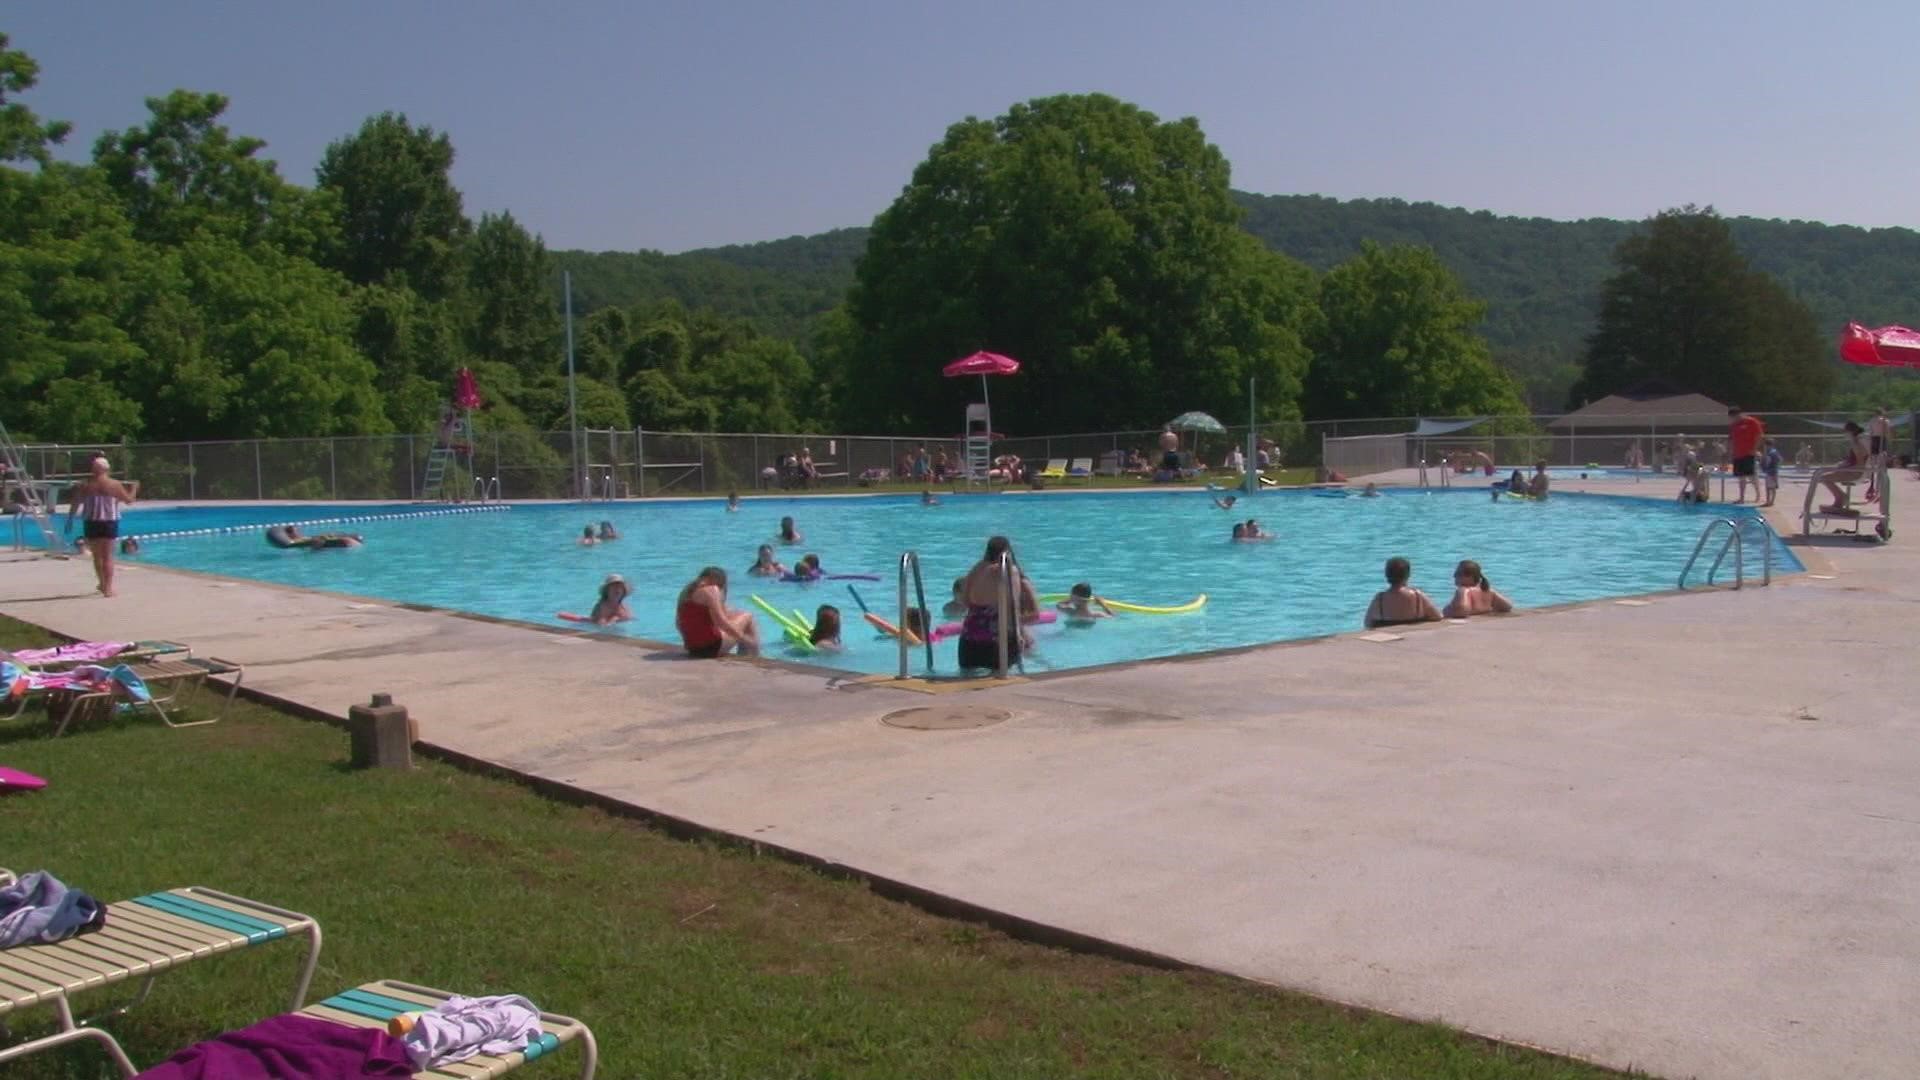 Tennessee leaders said the Panther Creek State Park swimming pool would close in December 2021, along with pools at 11 different state parks.